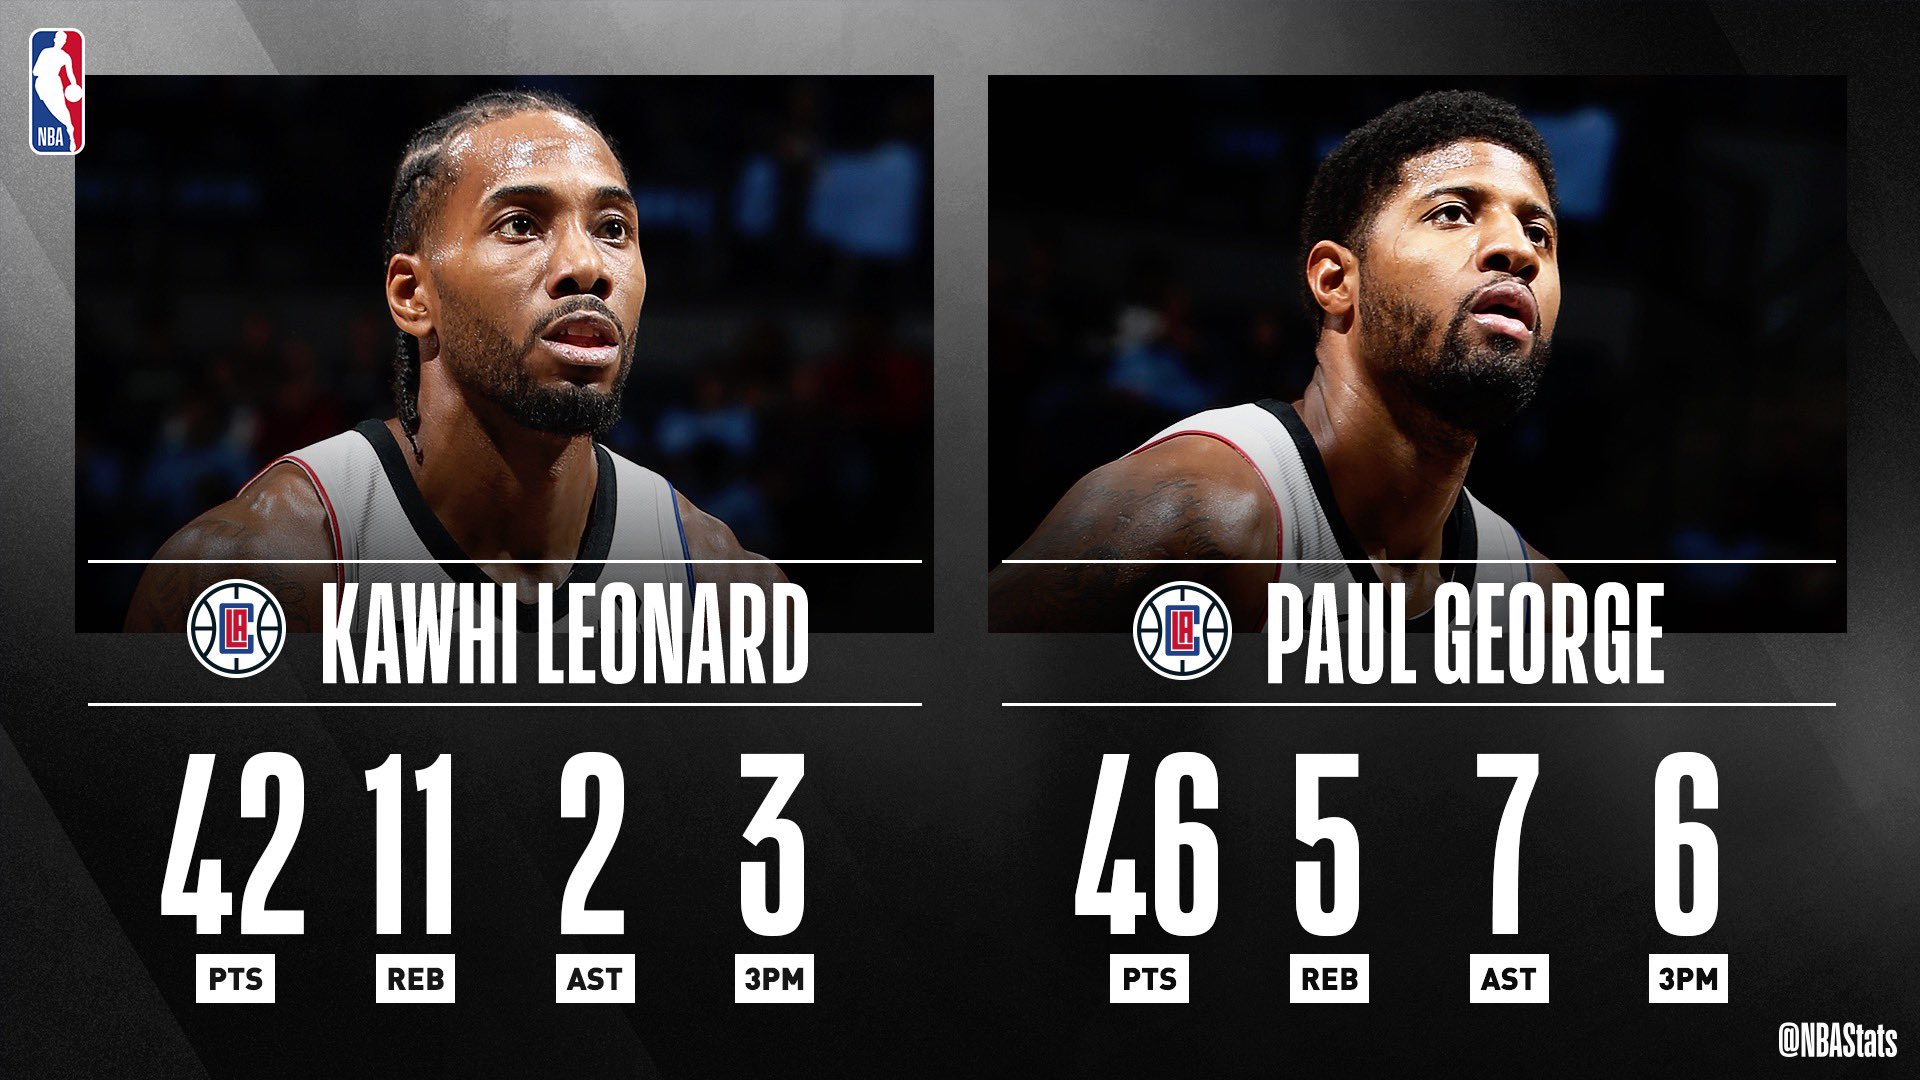 Nba Com Stats On Twitter Kawhi Leonard Paul George Are The Only Laclippers Teammates To Each Score 40 Pts In The Same Game Sapstatlineofthenight Https T Co Riinbtezsu